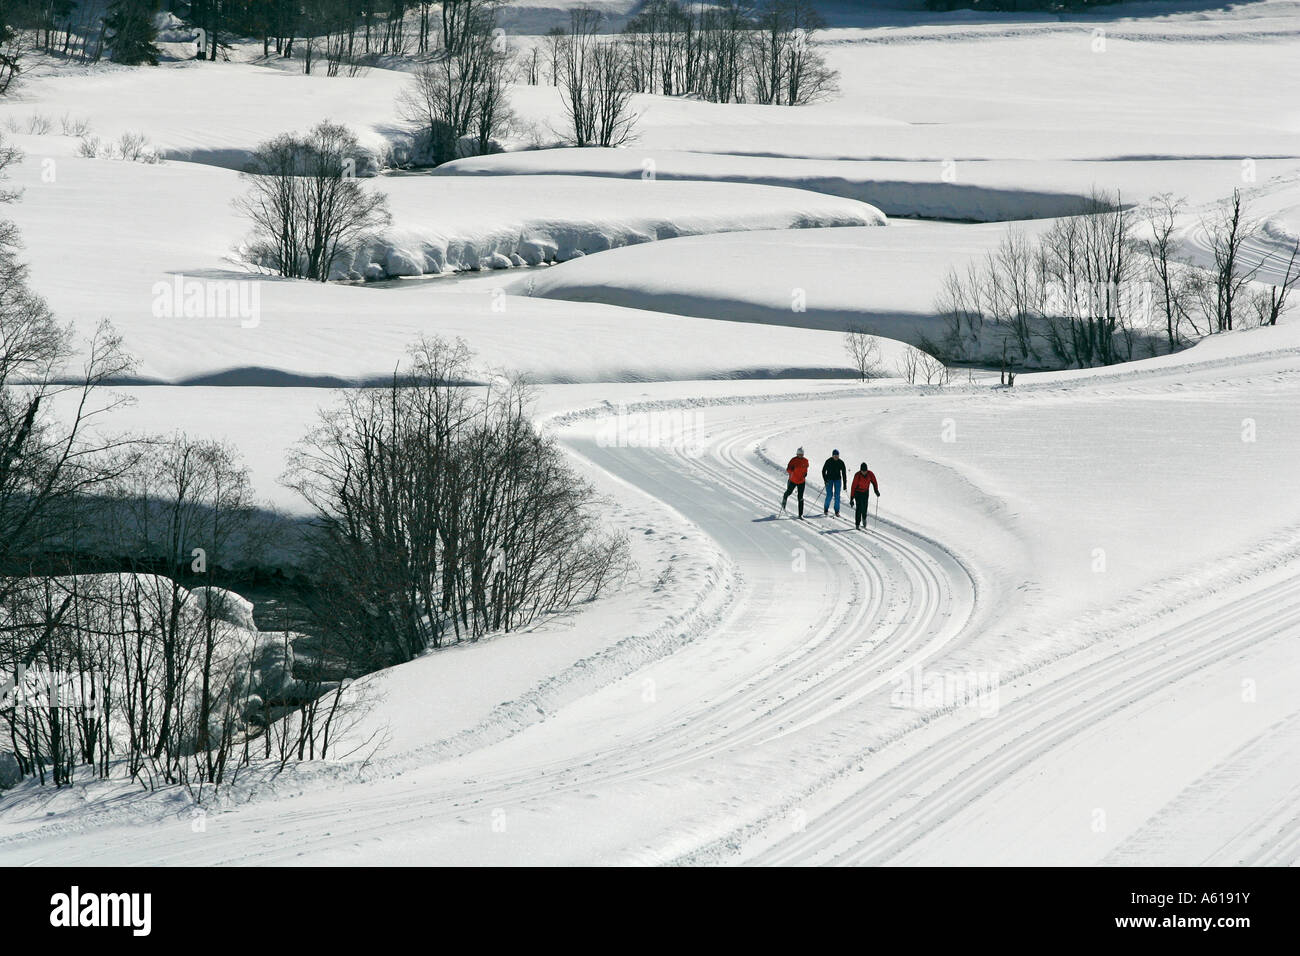 Ski-touring people in Valepp at Spitzingsee, Bavaria, Germany Stock Photo